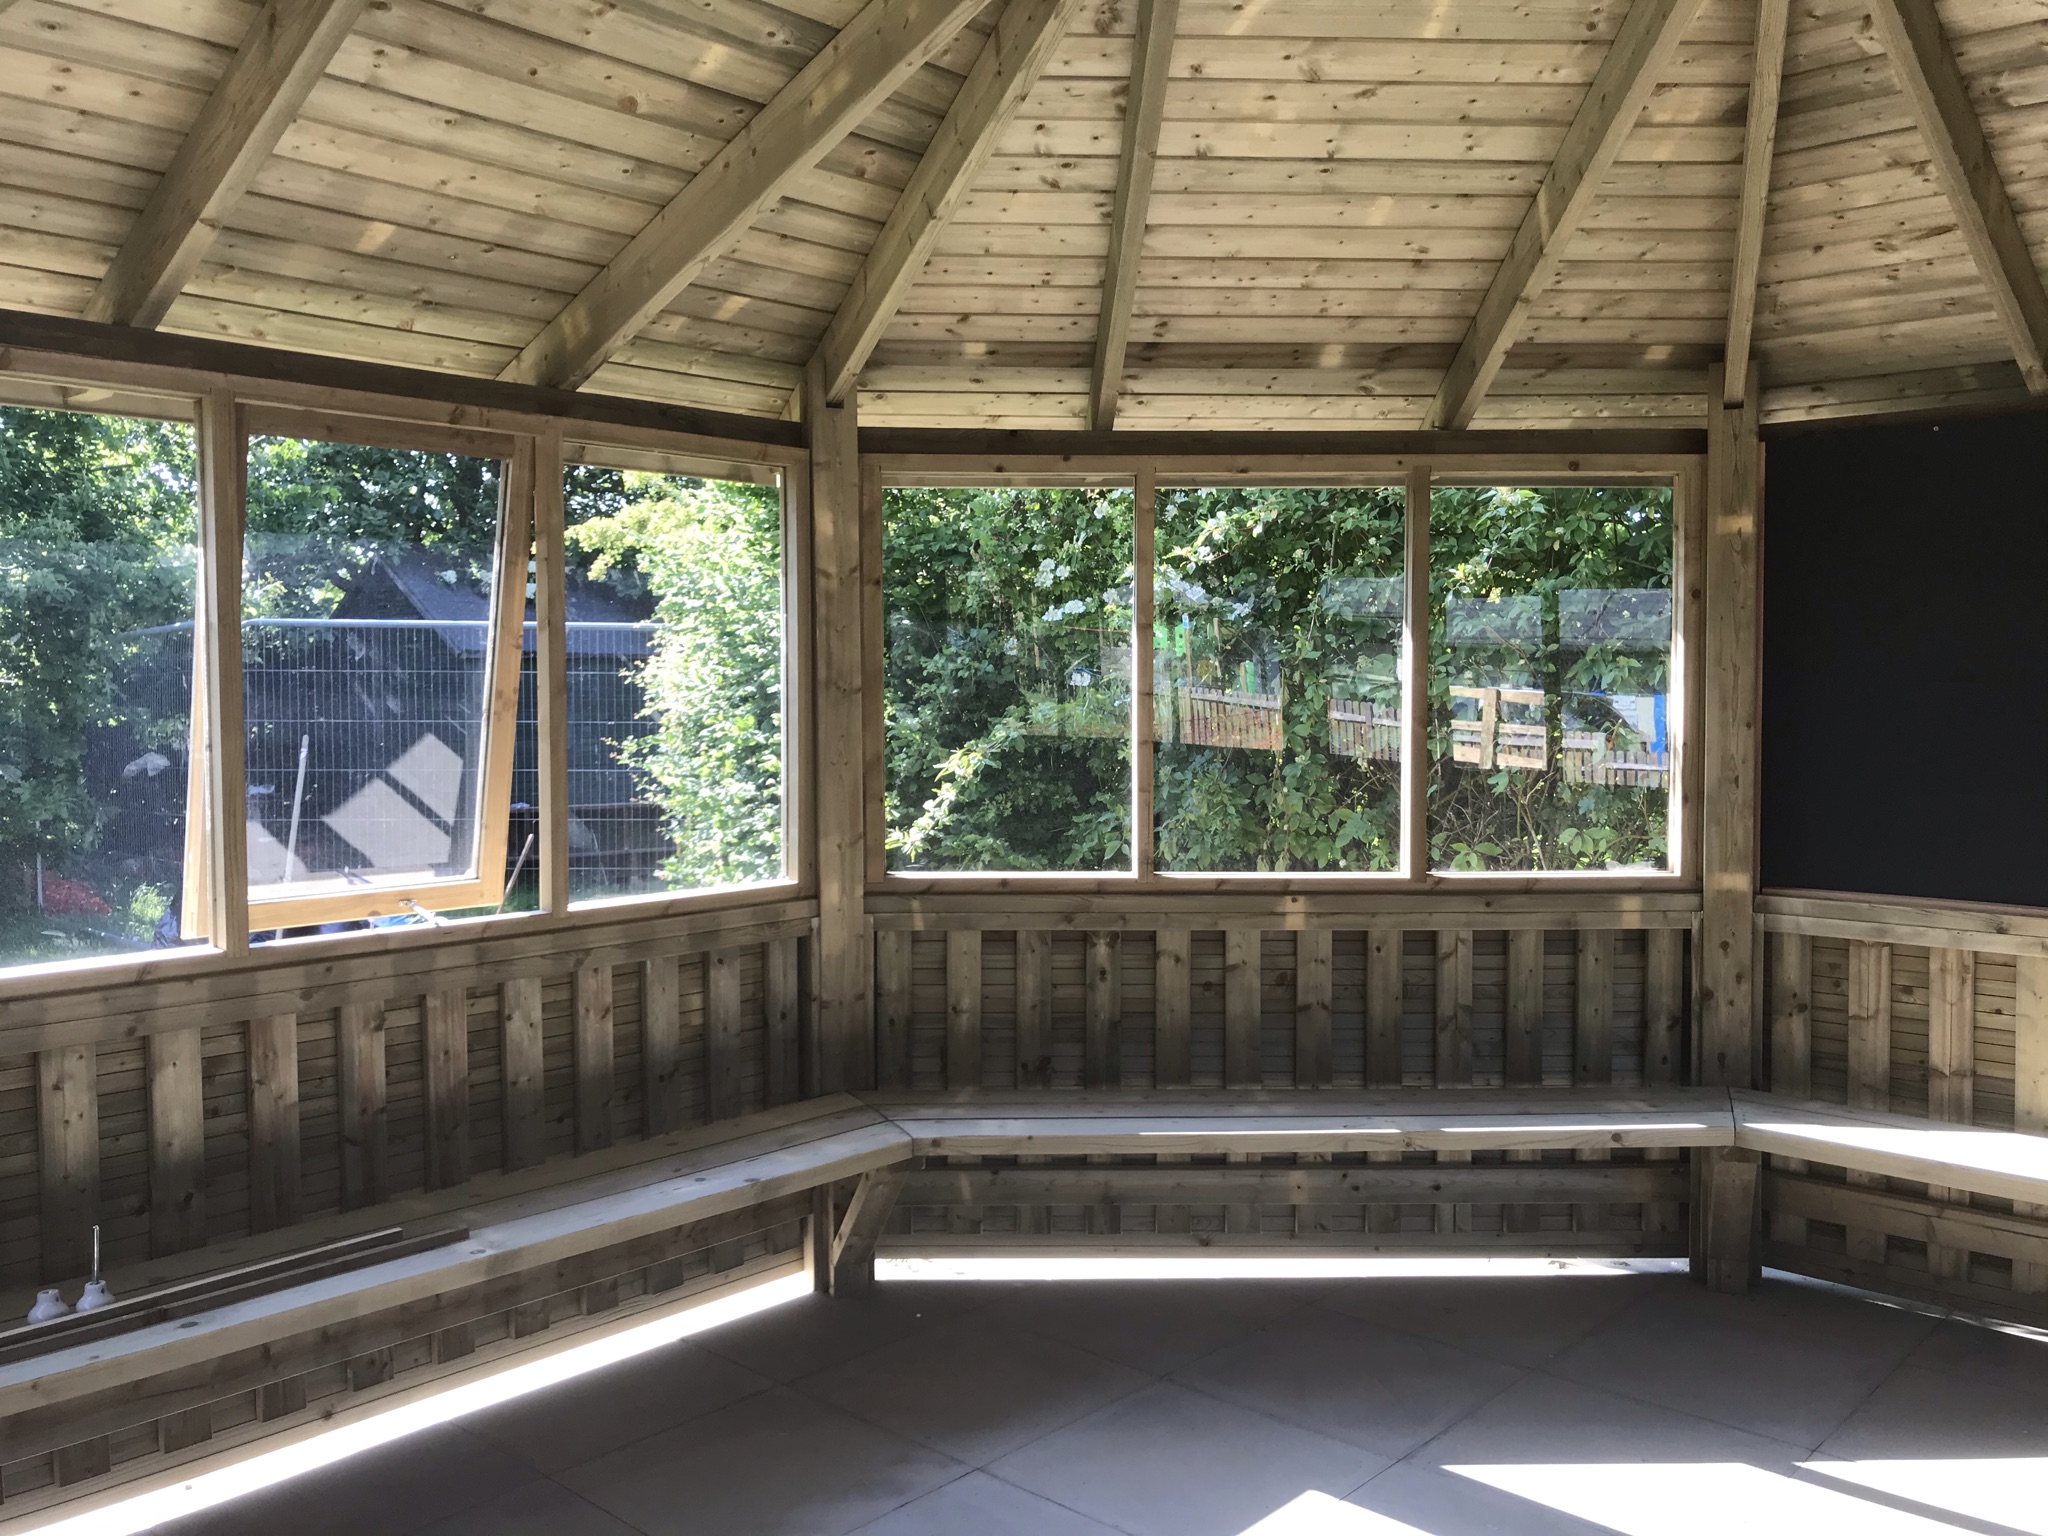 What is an outdoor wooden classroom?